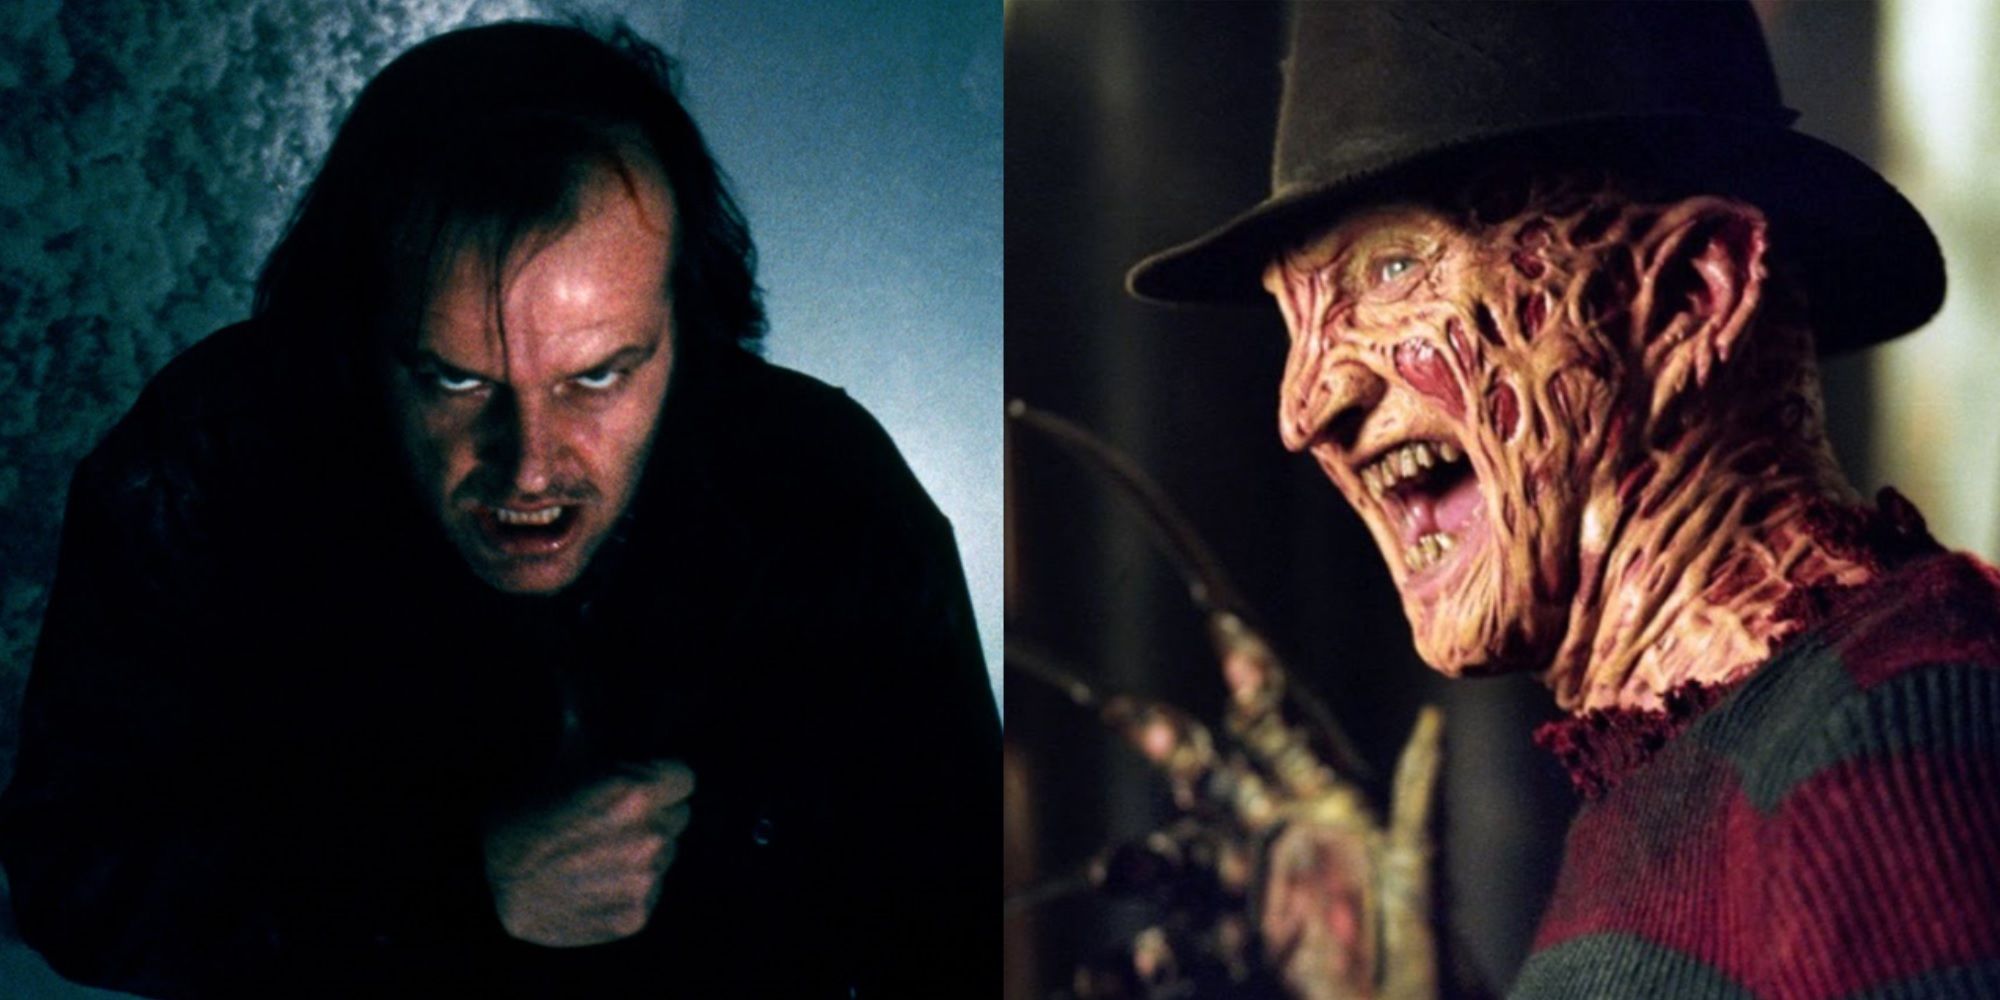 Split image of Jack Nicholson in The Shining and Robert Englund in A Nightmare on Elm Street